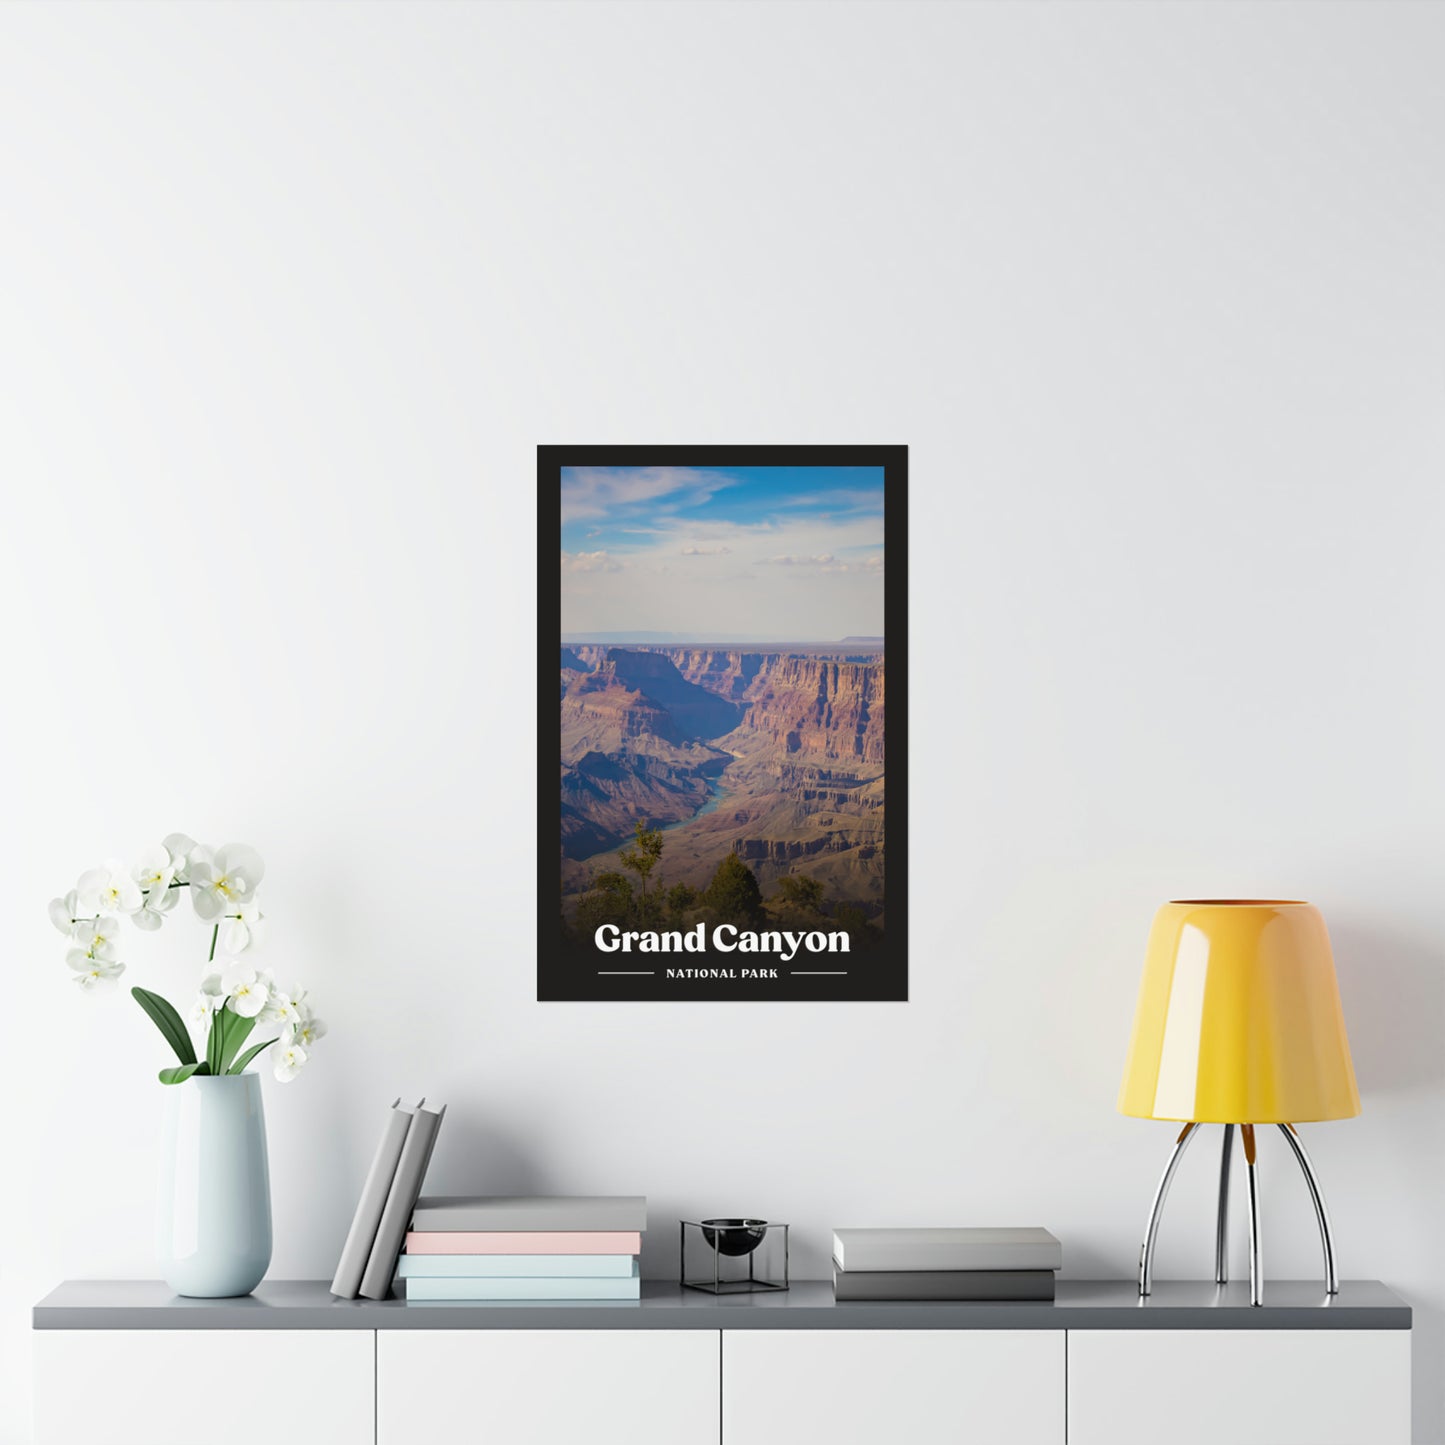 Grand Canyon National Park Travel Poster